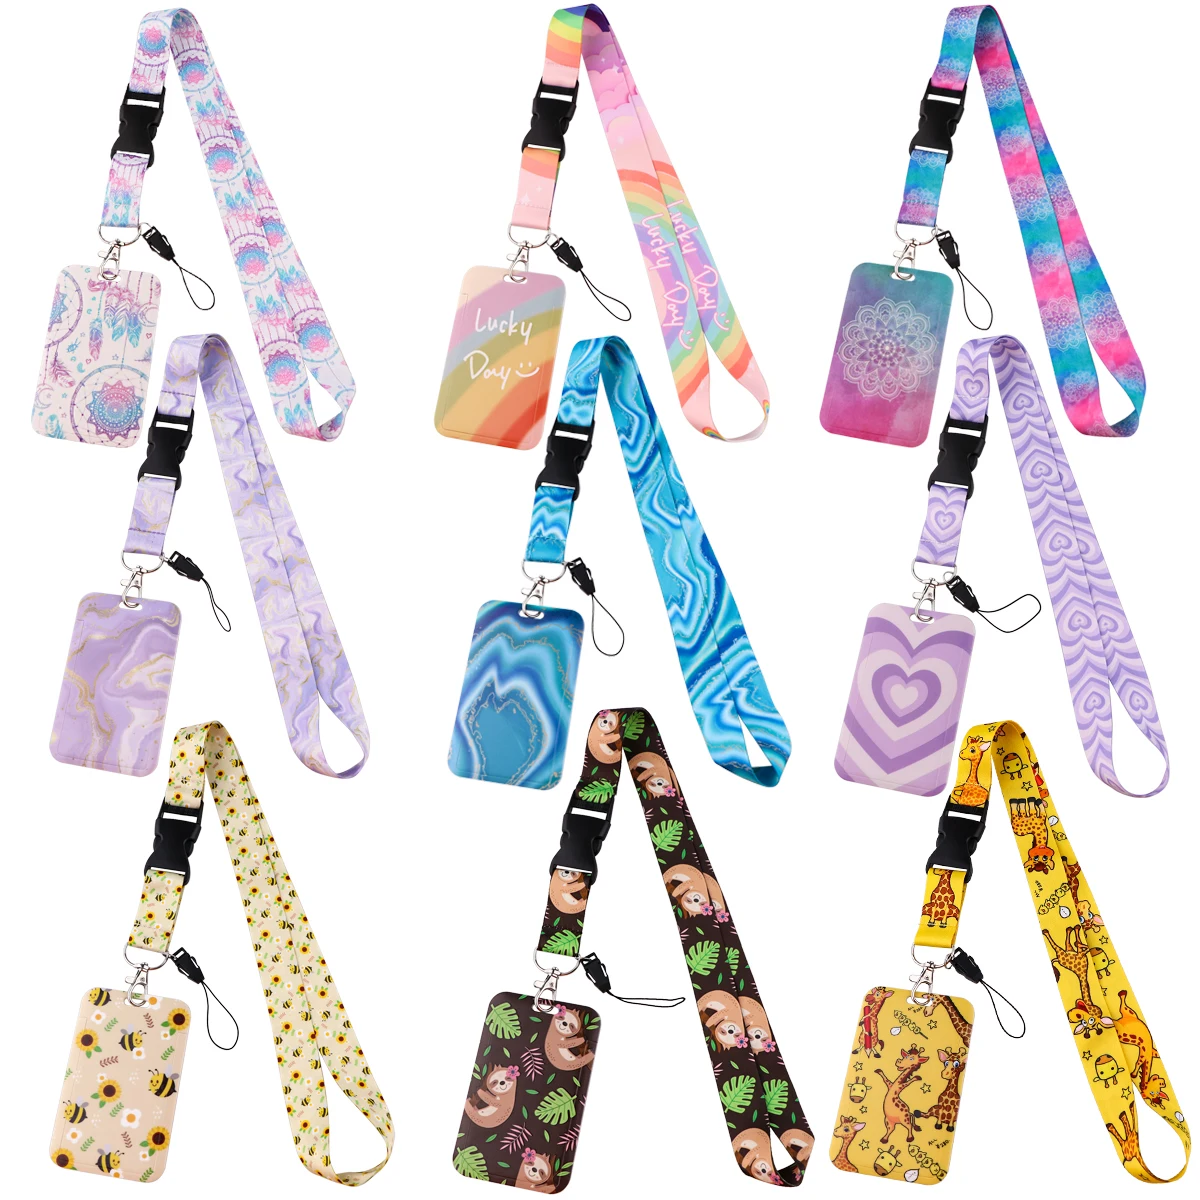 Marble Printing Lanyards for Keys Neck Strap ID Card Gym Cell Phone Straps USB Badge Holder DIY Hang Rope Neckband Accessories 1pcs lanyard neck strap business id card name badge holder lanyard for keys mobile phone straps diy hang rope